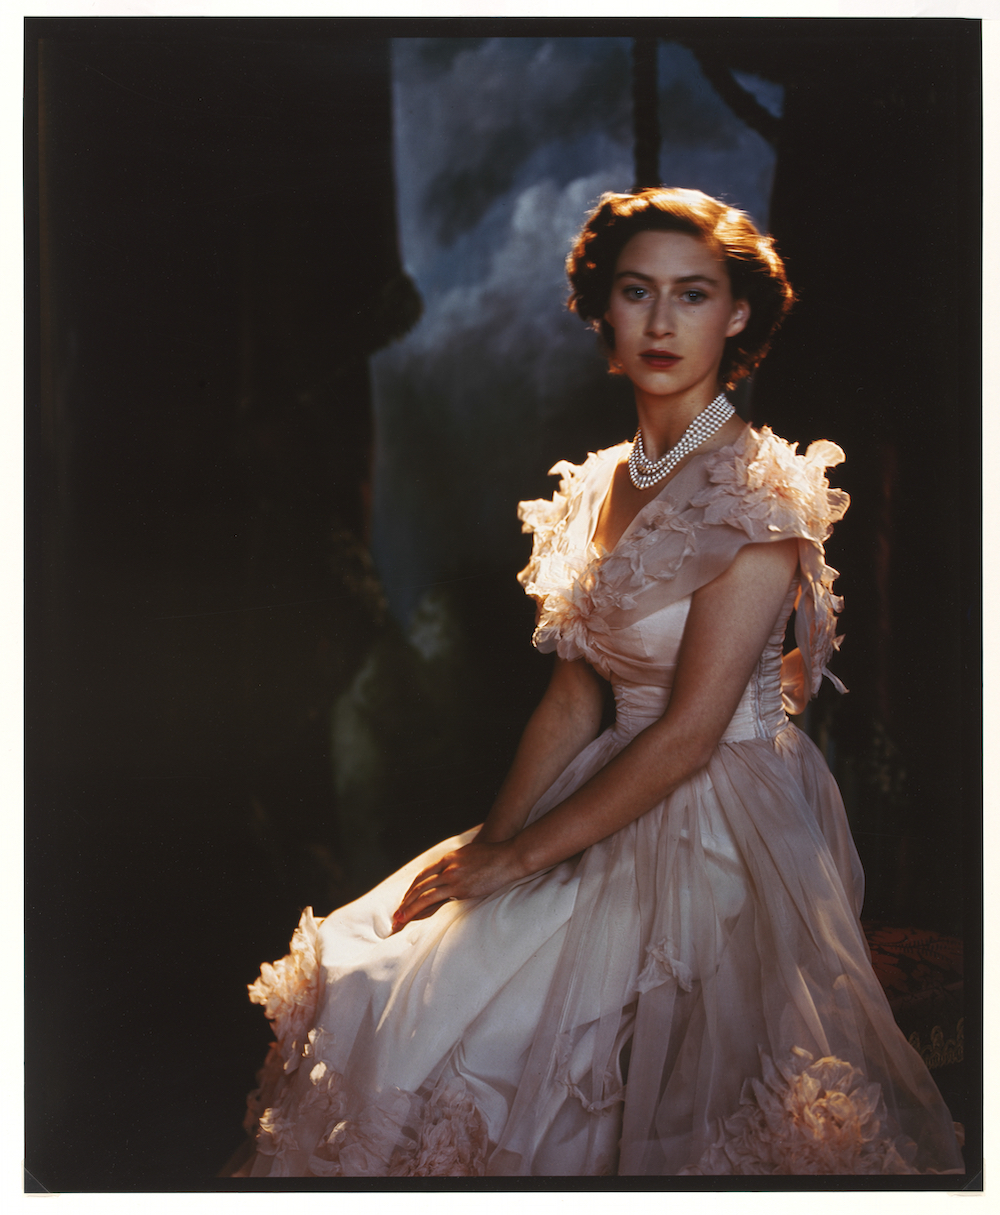 H.R.H. Princess Margaret (1930-2002), aged 19, three-quarter length portrait with studio backdrop by Sir Cecil Beaton (1904-80). C-Type colour print. Image: © Cecil Beaton / Victoria and Albert Museum, London